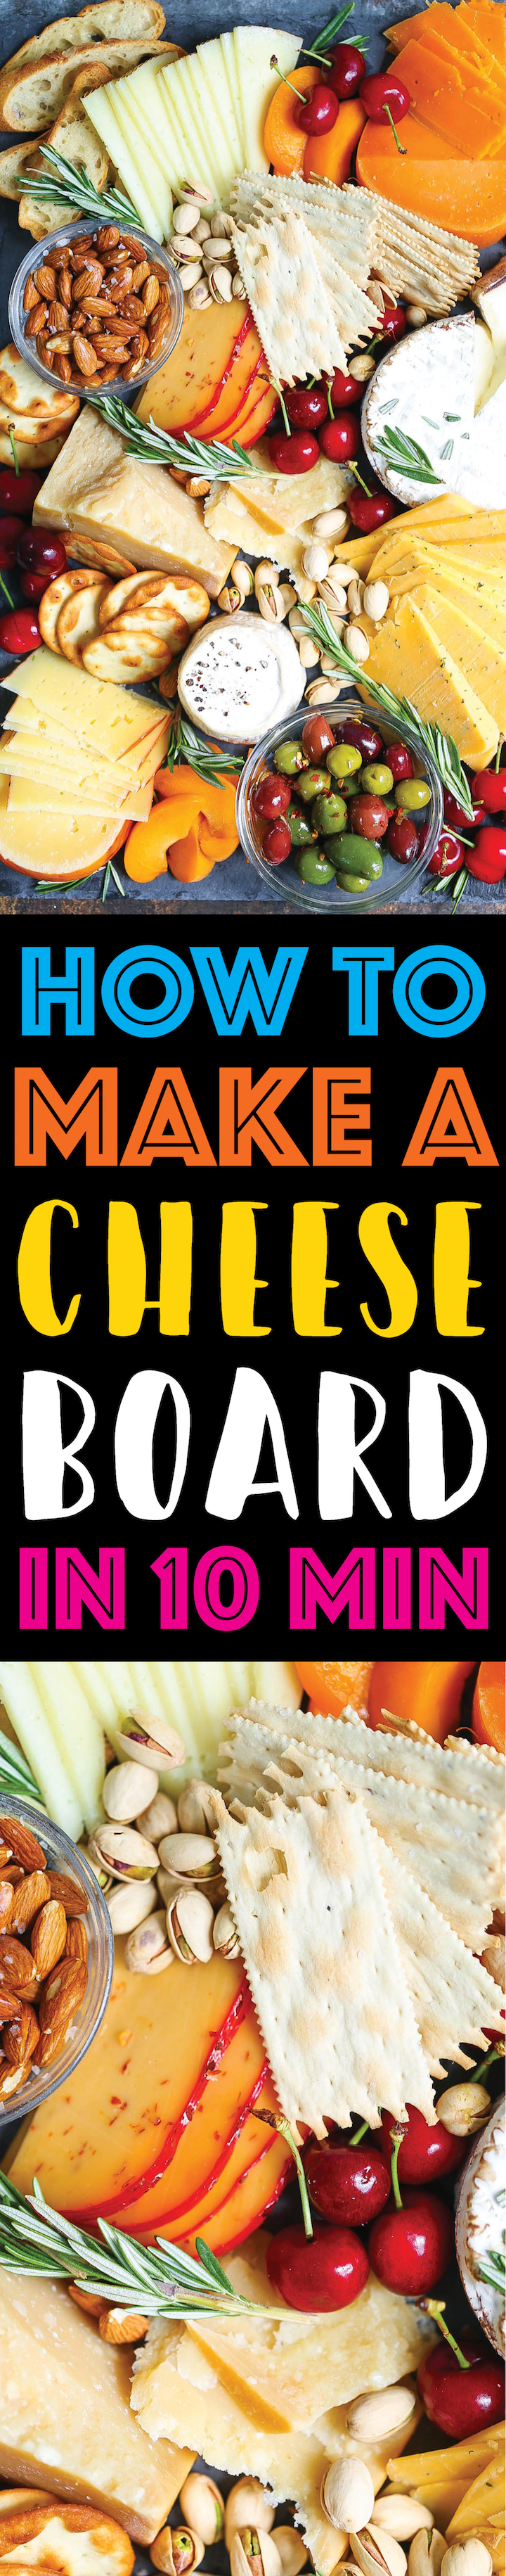 How to Make an Easy Cheese Board in 10 Minutes - Here are the tips and tricks on how to make a KILLER cheese board! So easy, beautiful and well-balanced!